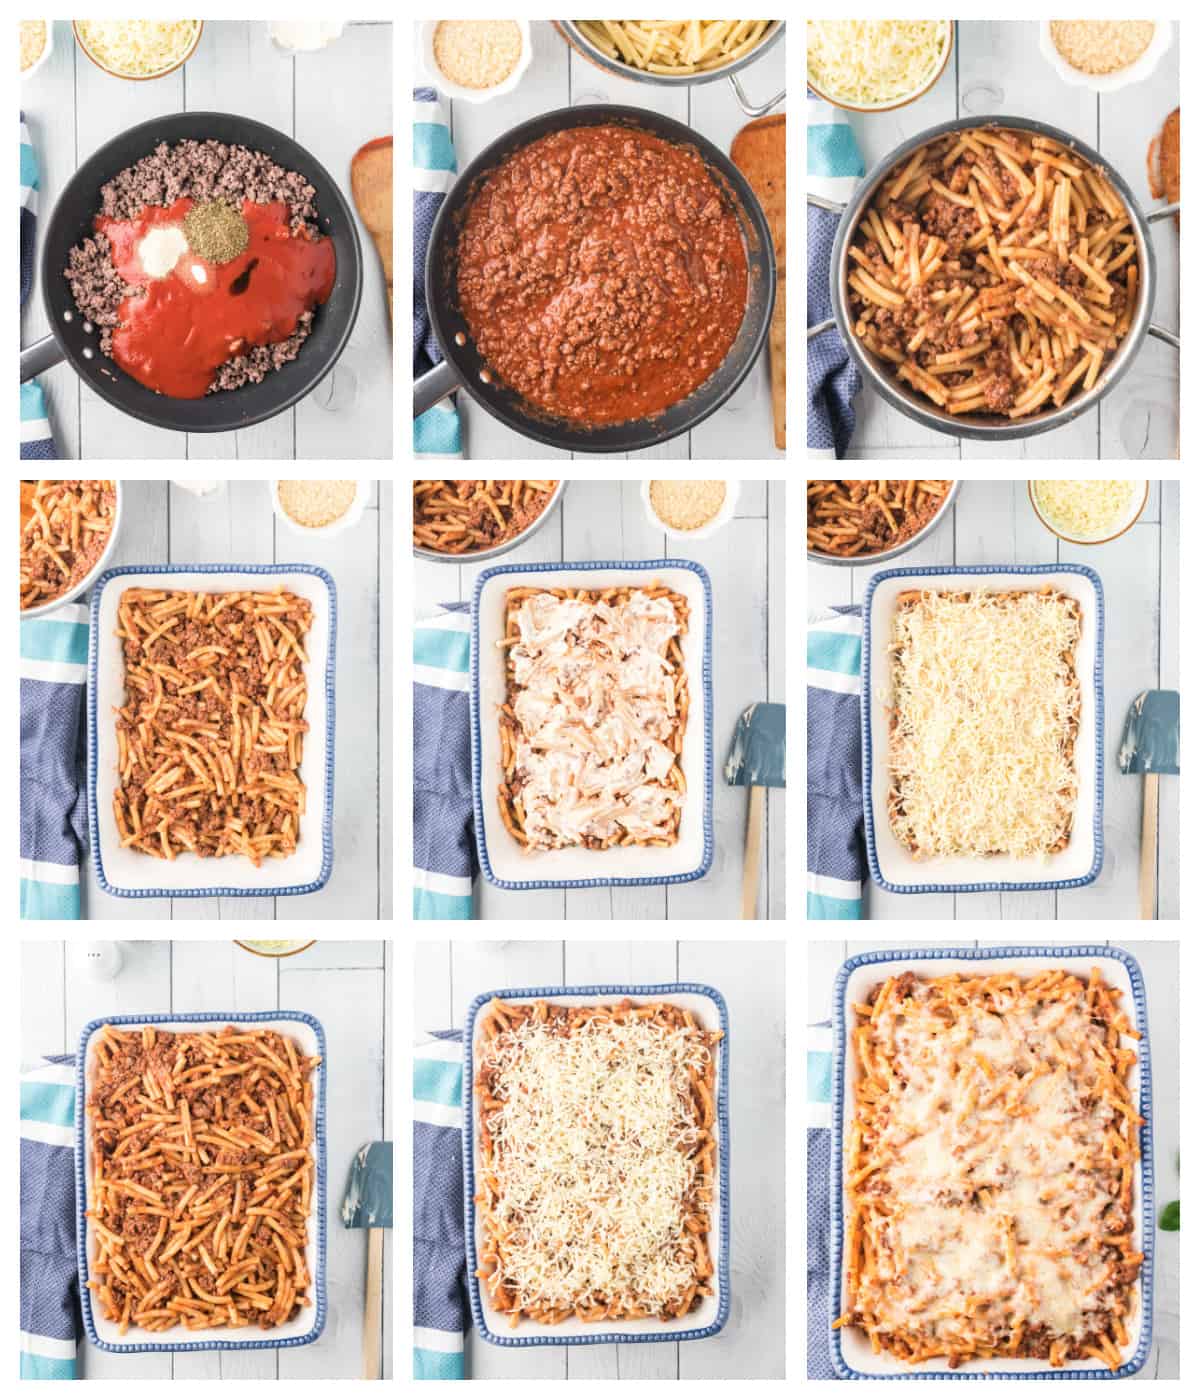 Step by step photos on how to make a Baked Ziti Recipe.